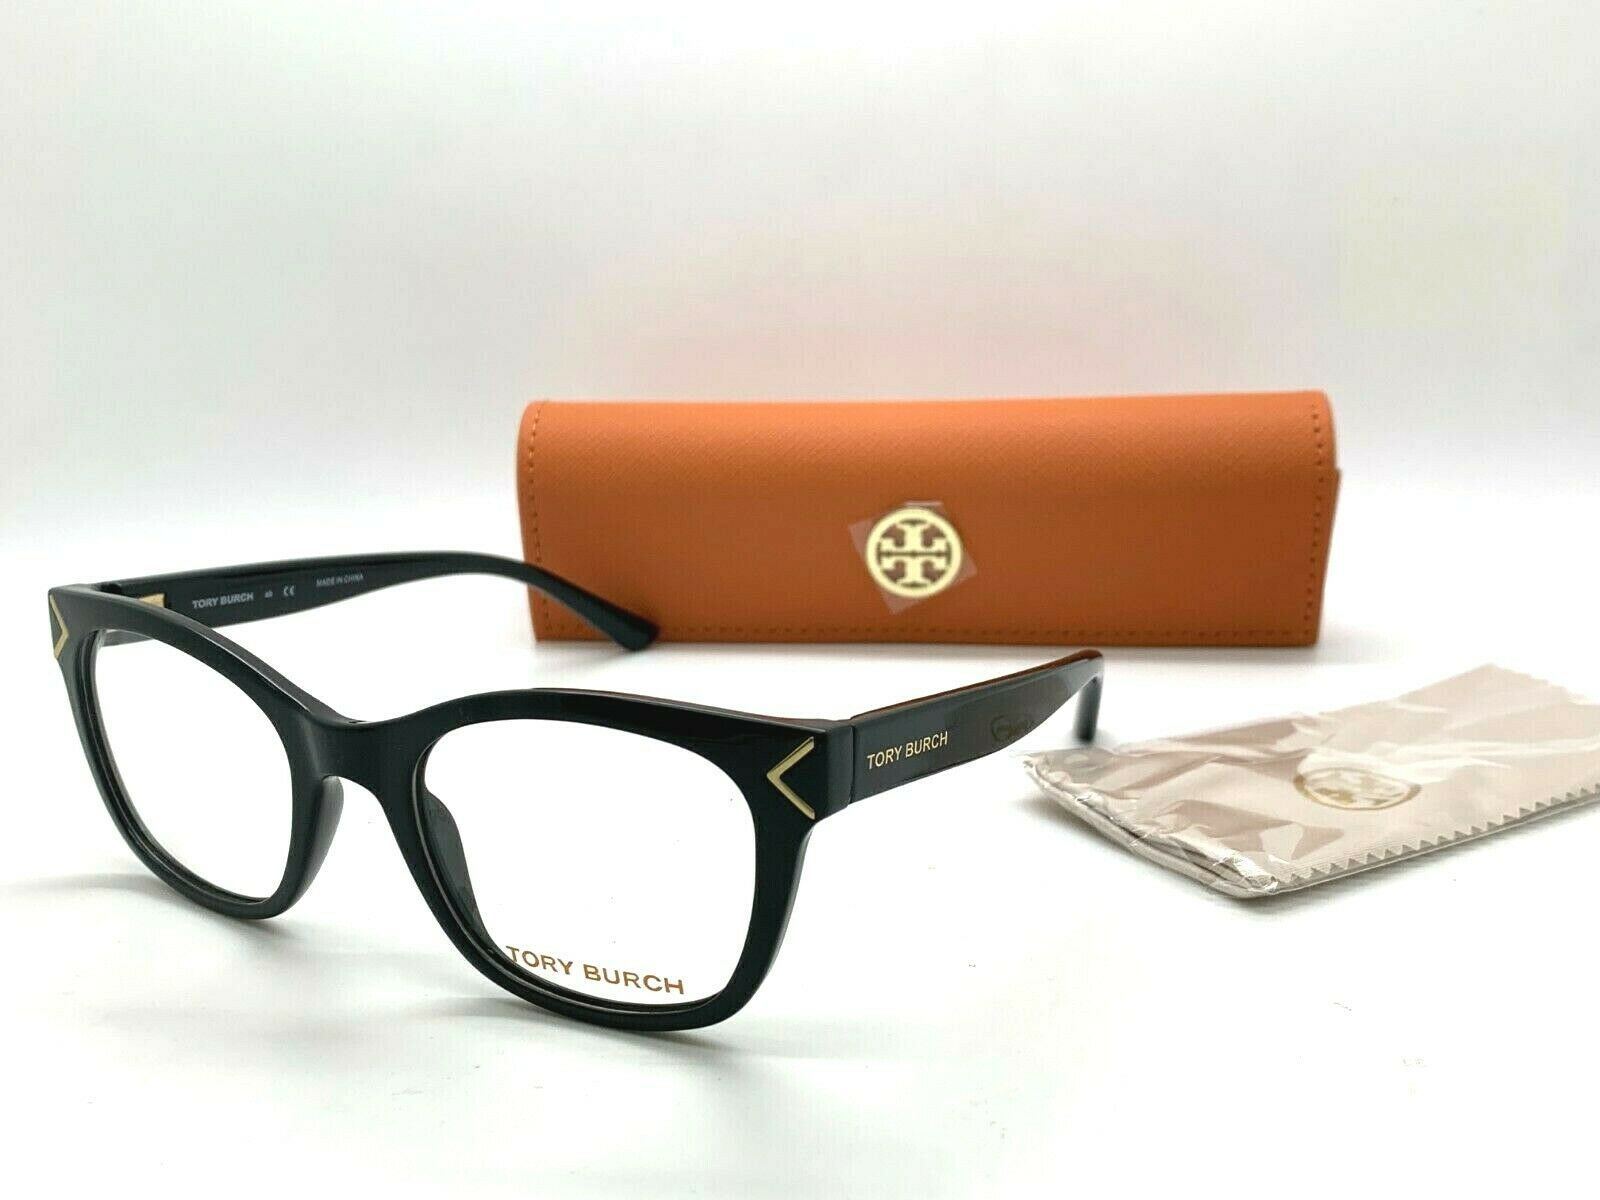 Primary image for Tory Burch TY 4003 1377 BLACK 49-19-135MM SMALL Eyeglasses Frame /CASE